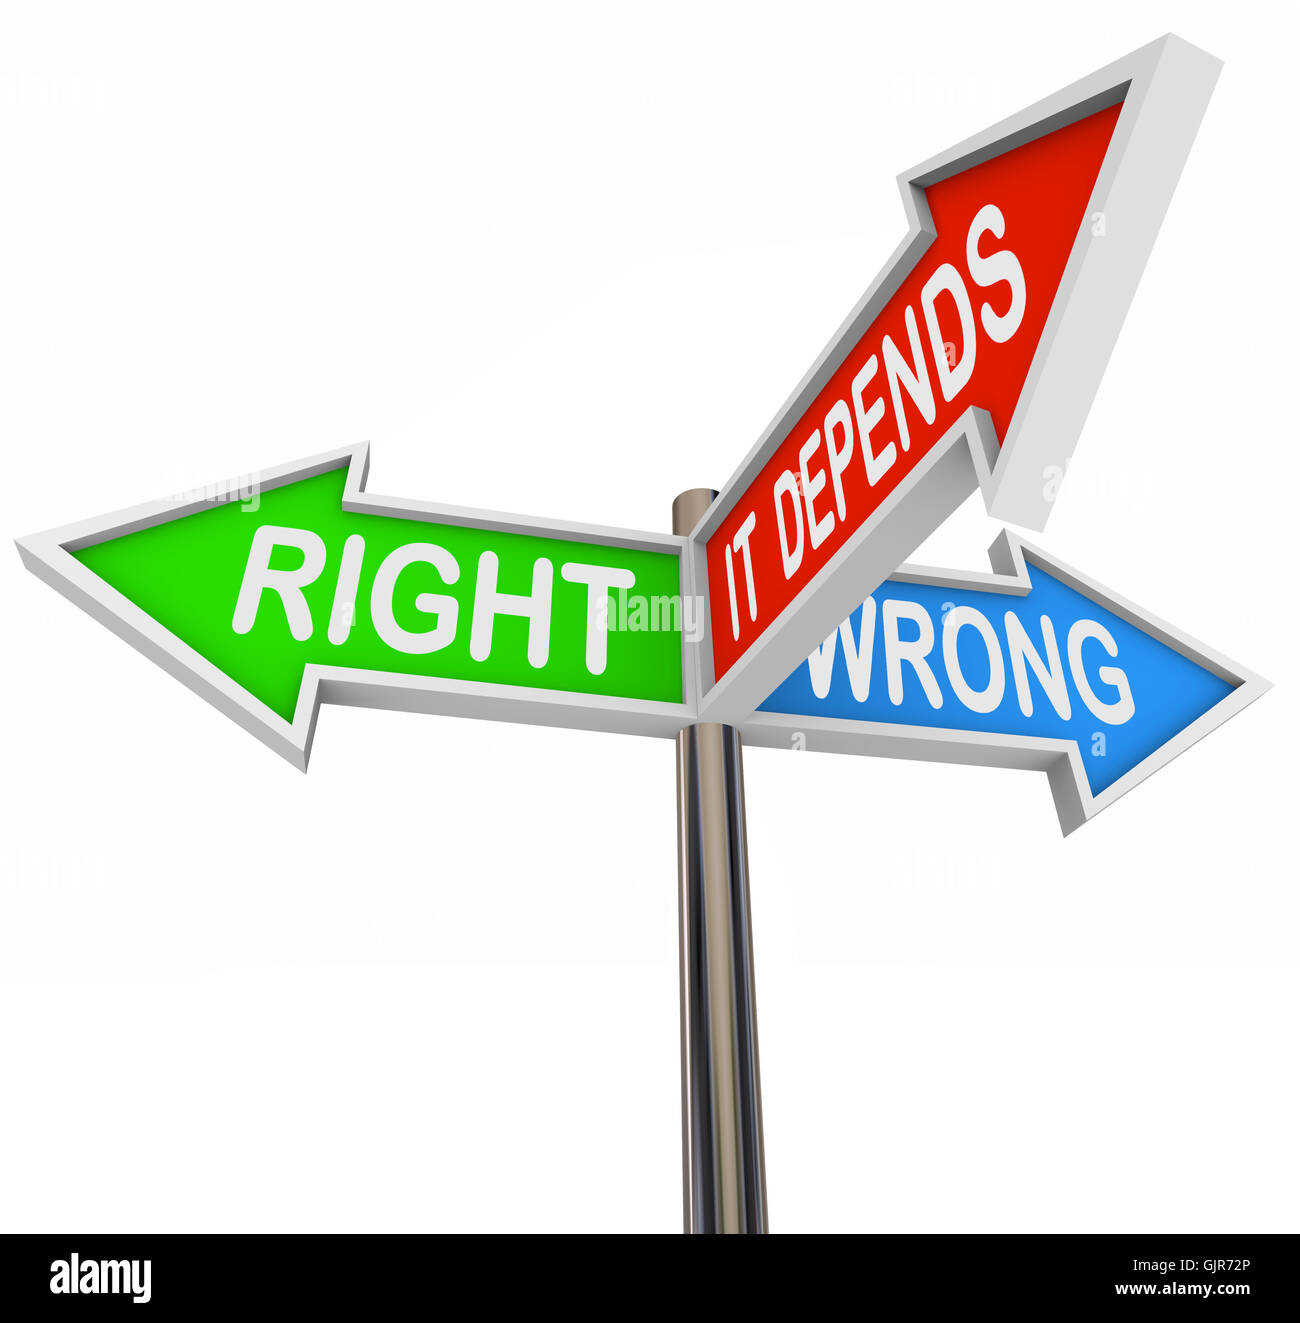 Right Wrong It Depends - 3 Colorful Arrow Signs Stock Photo